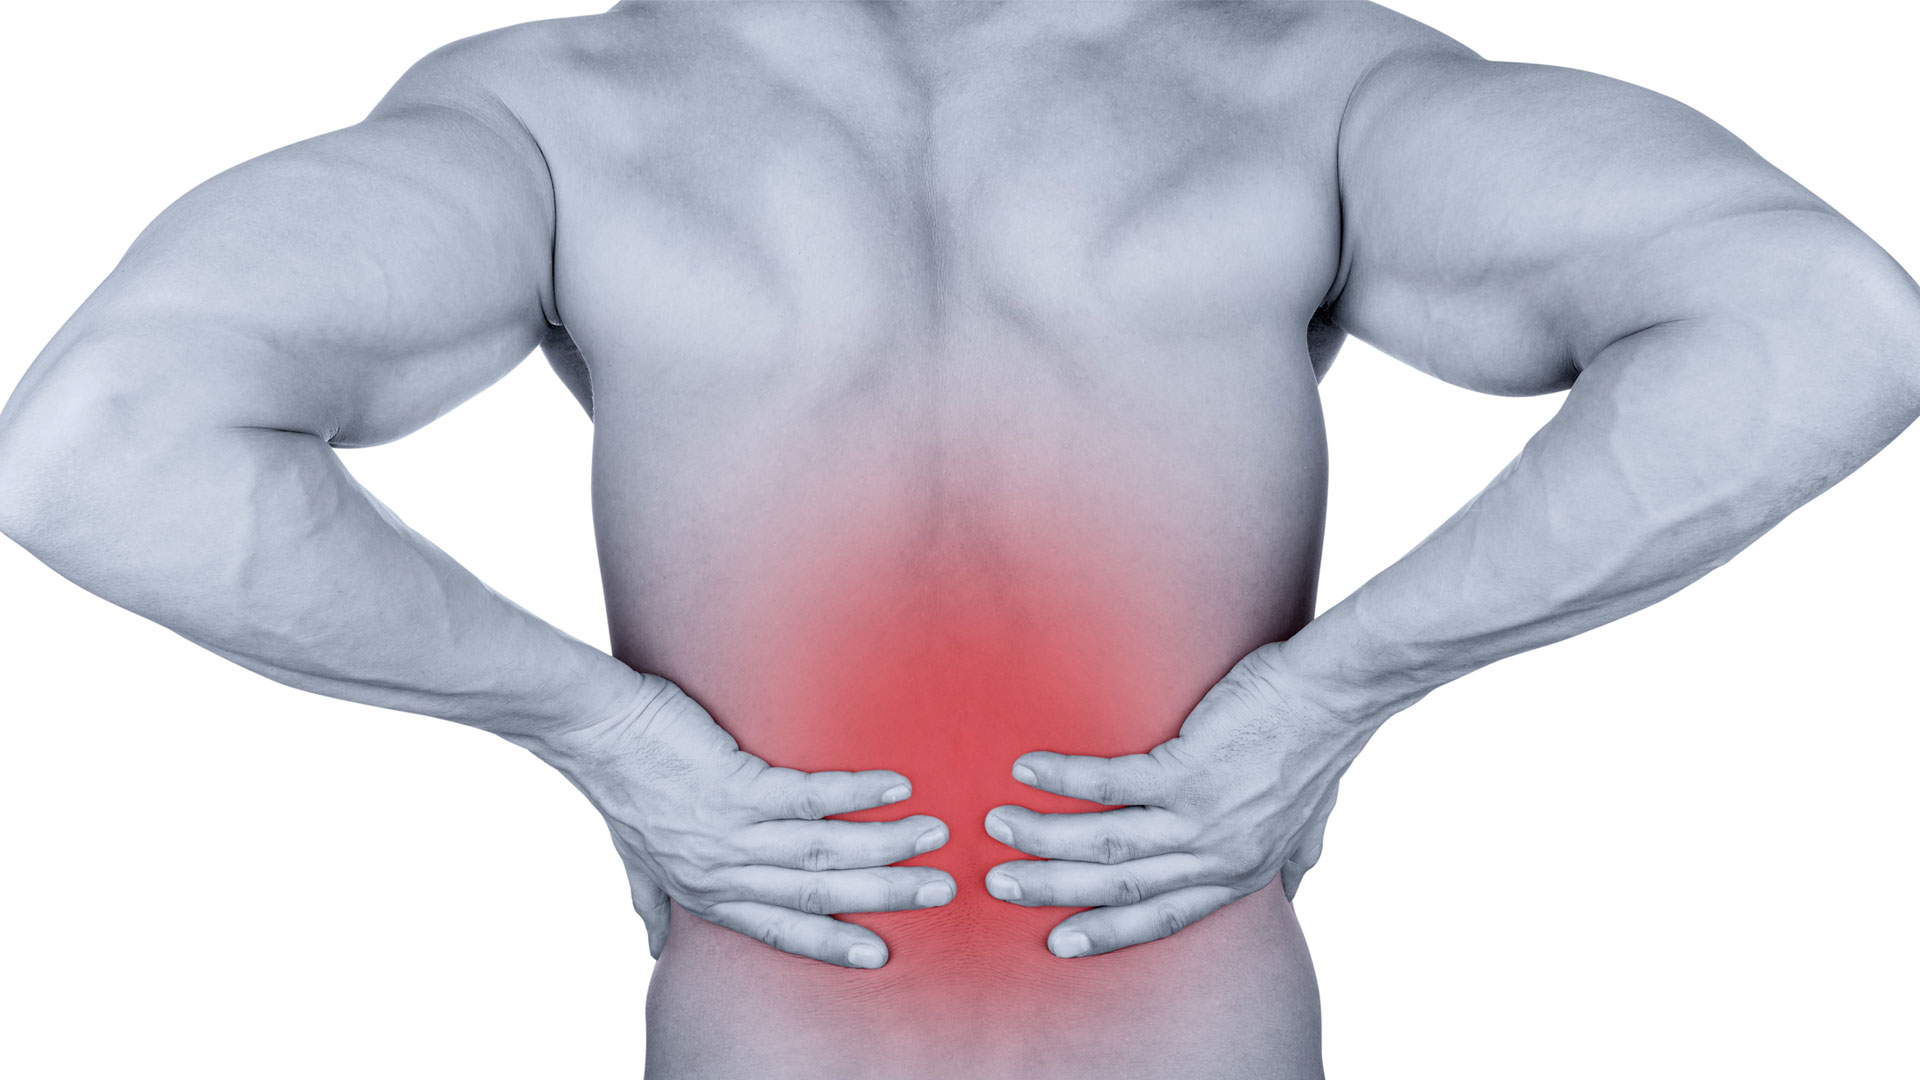 back pain, low back, lumbago, disability, cost, pain, relief, safe, stagnation, anti-inflammatory, cost-effective